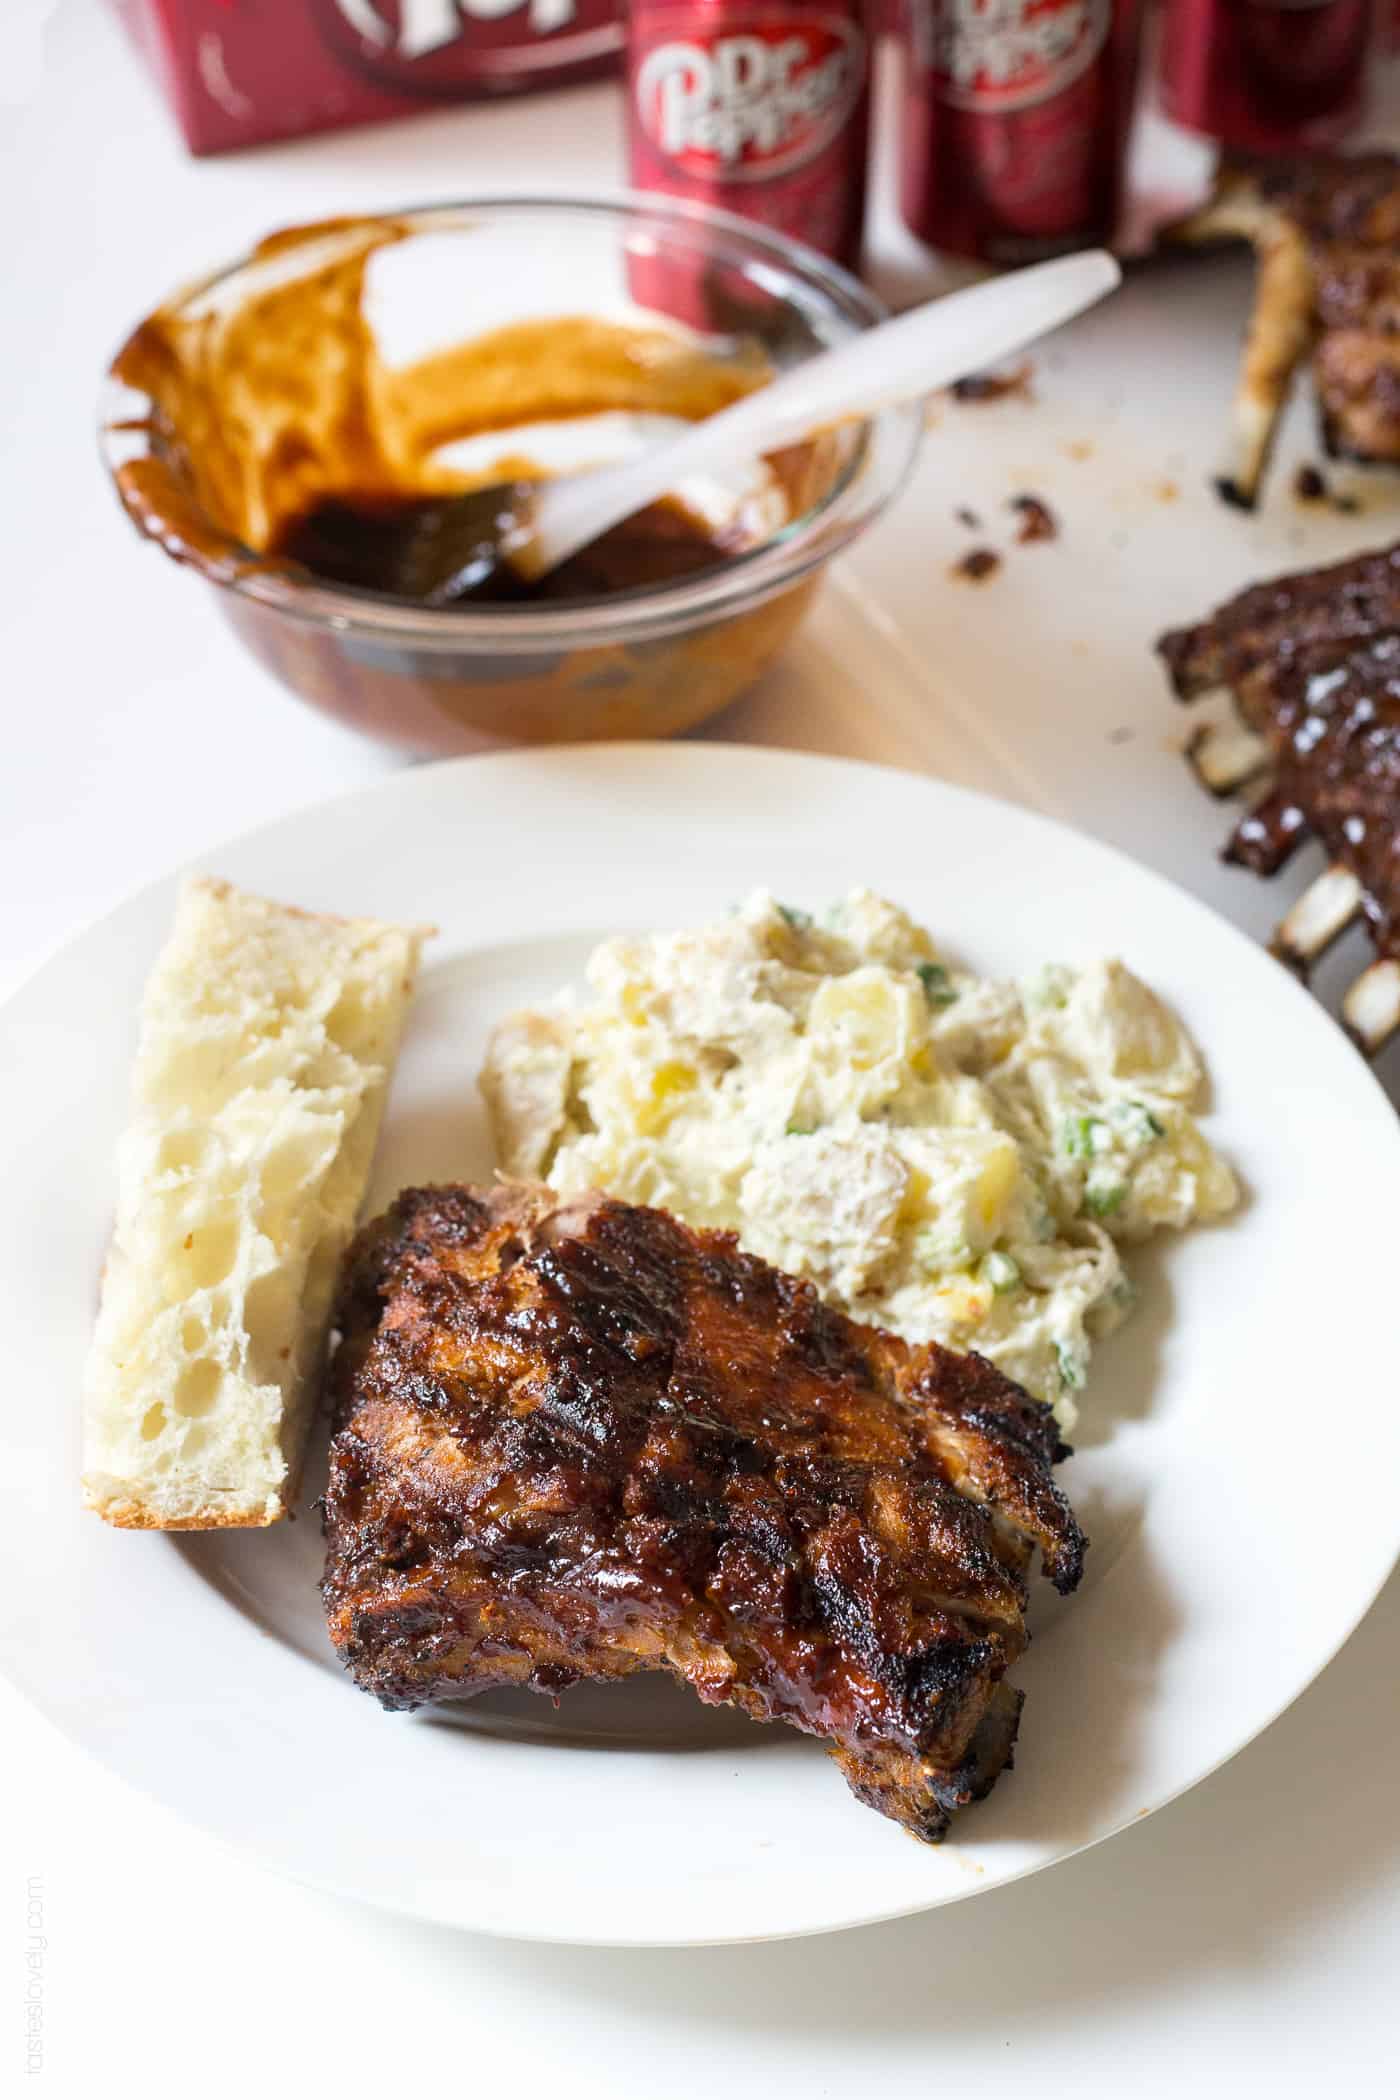 dr pepper ribs on a white plate with potato salad and bread